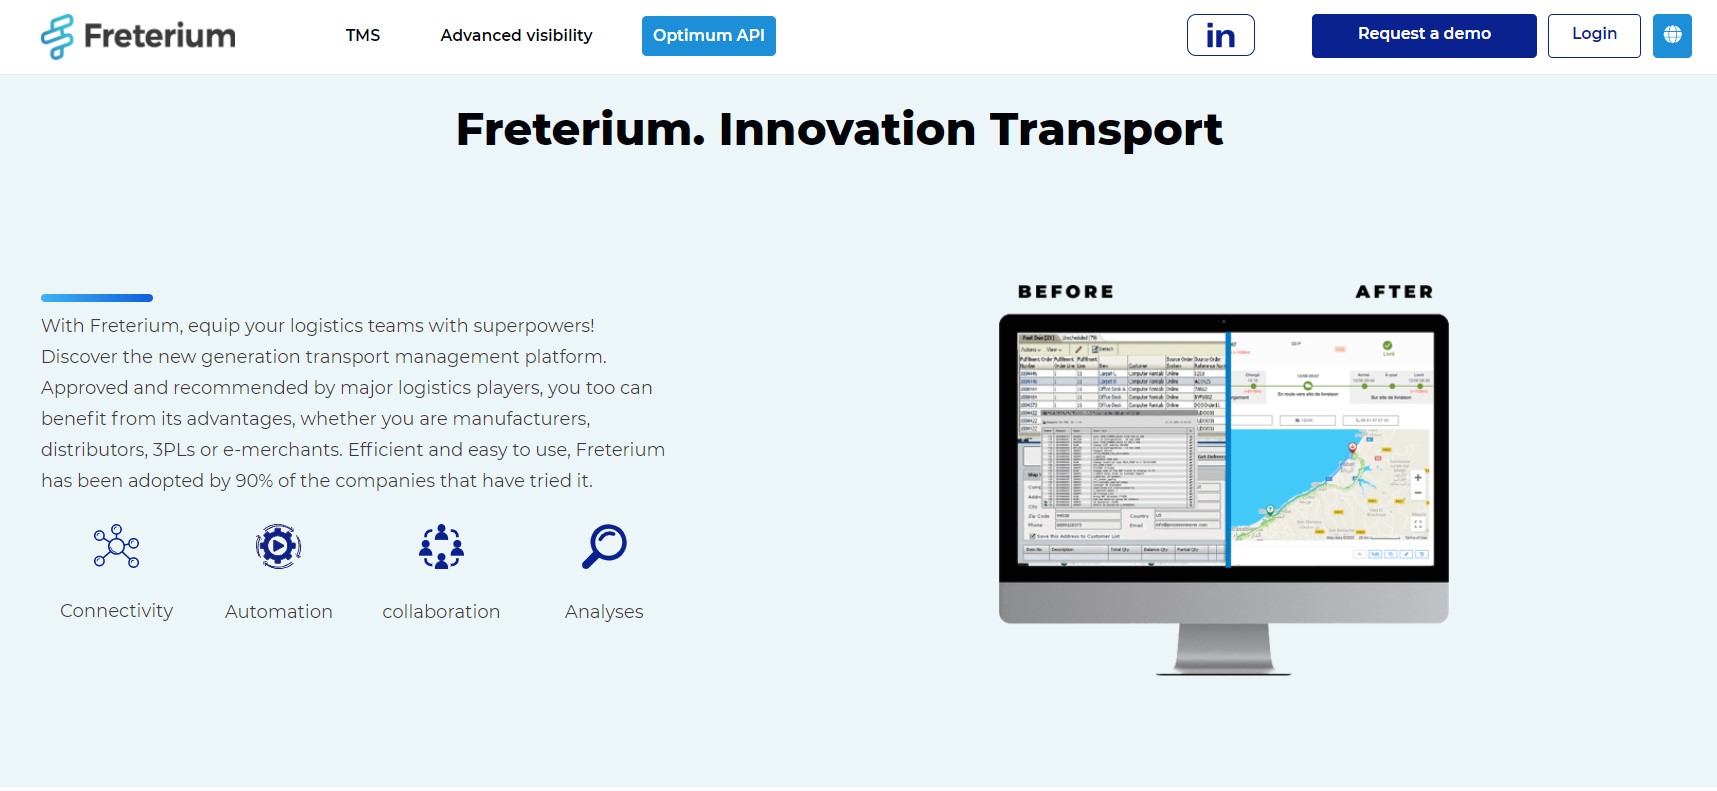 Get feedback from a vast remote working audience about Freterium